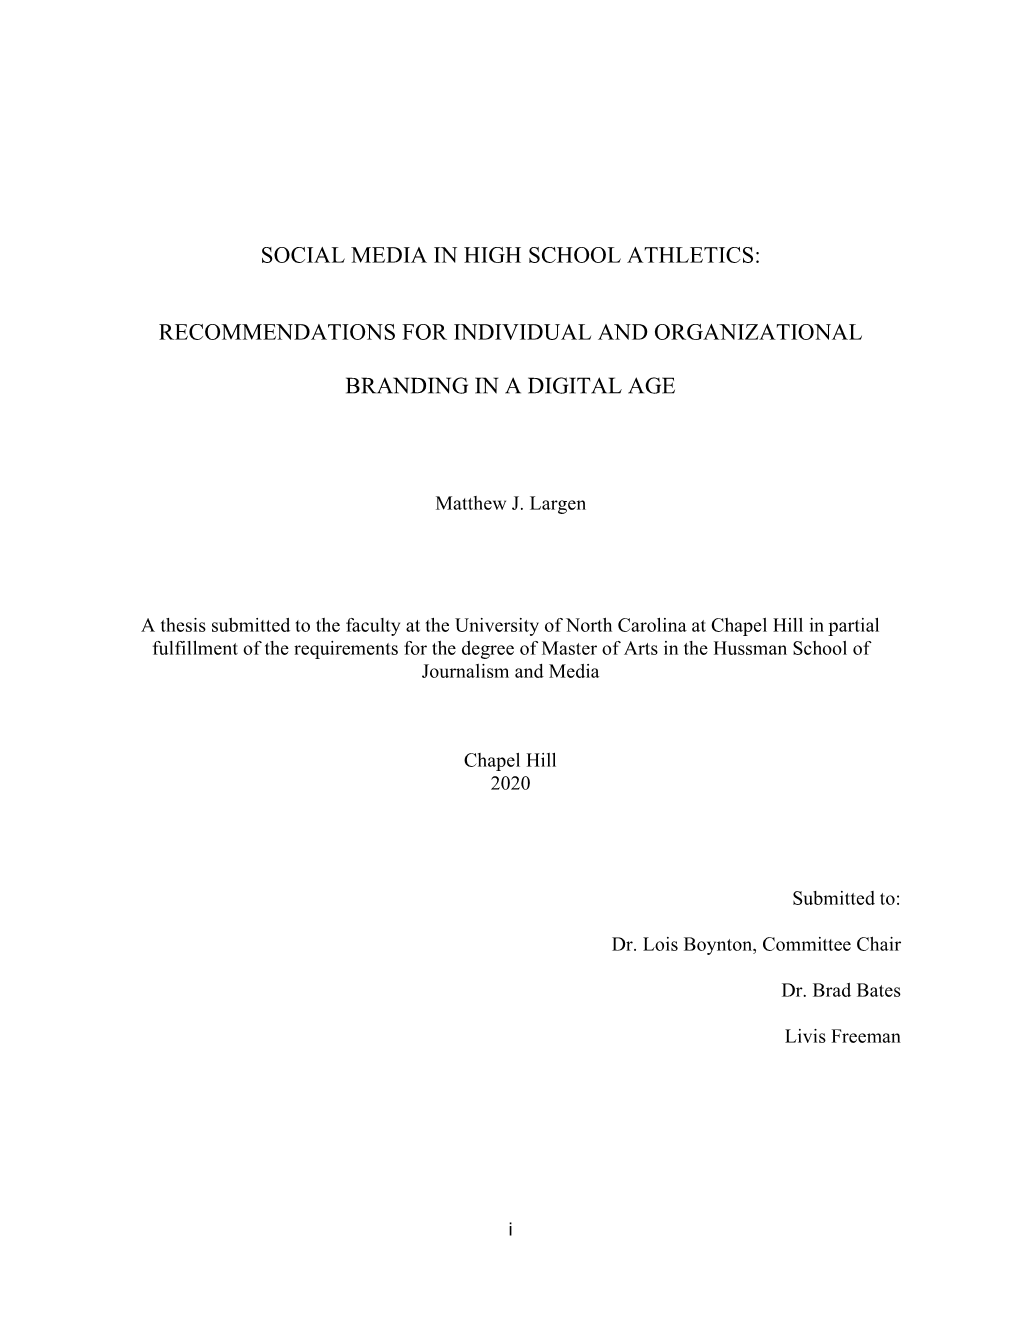 Social Media in High School Athletics: Recommendations for Individual and Organizational Branding in a Digital Age (Under the Direction of Dr